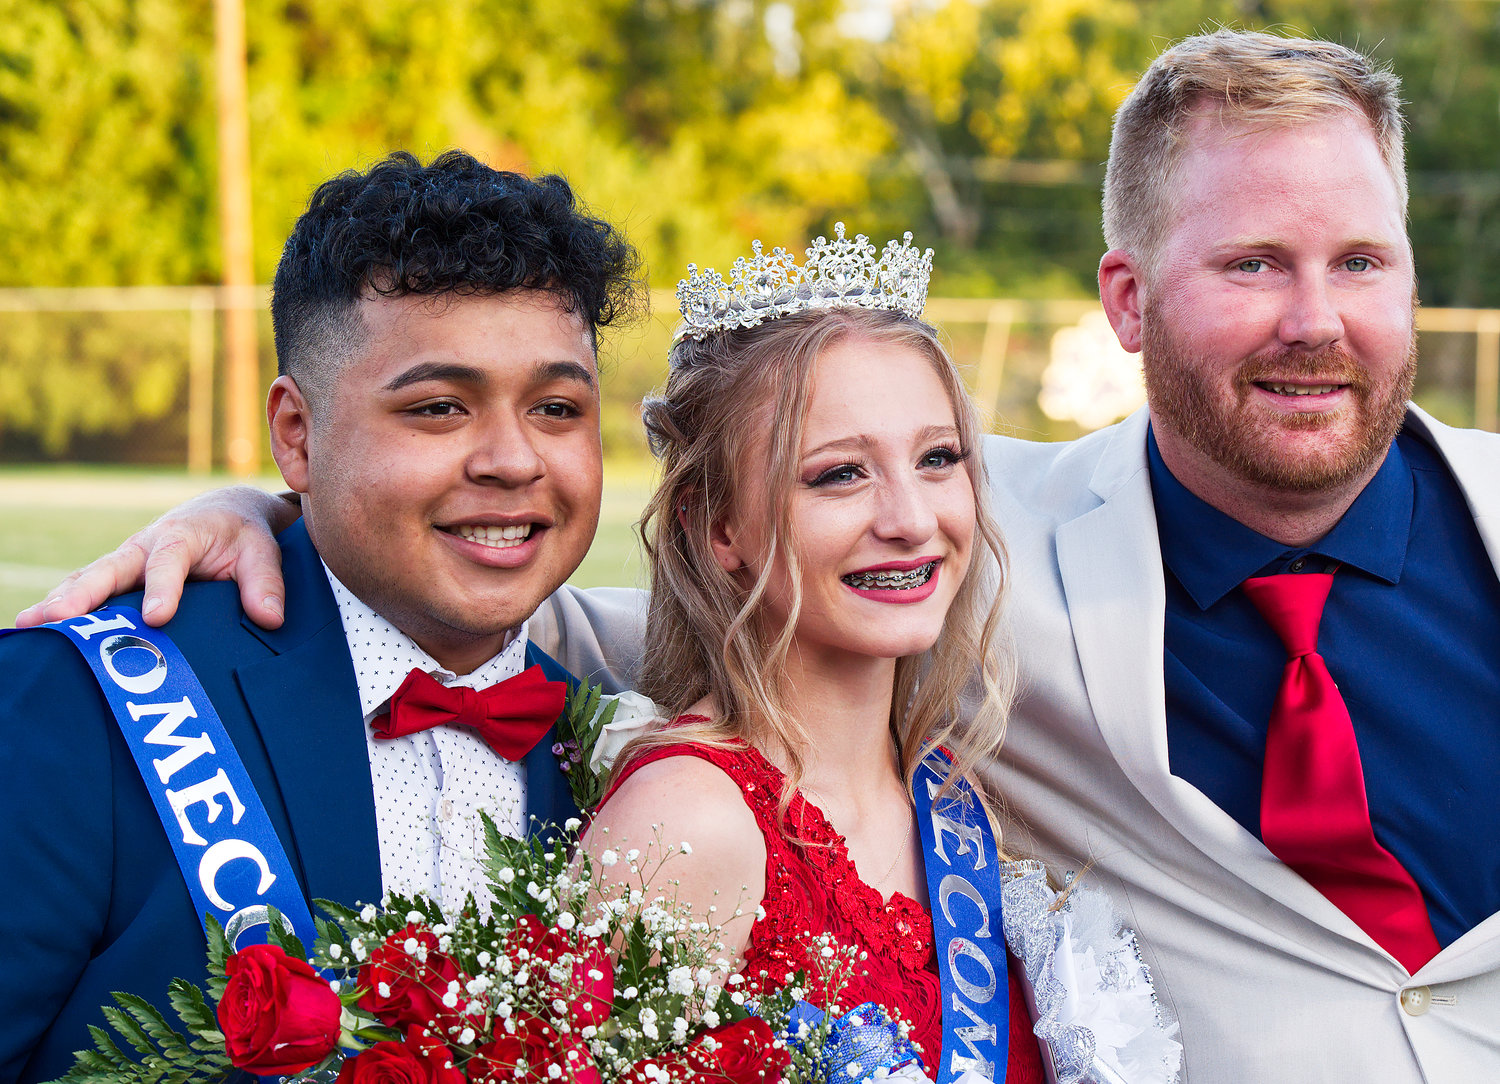 Kaitlynn Barnett was crowned 2020 Quitman High School homecoming queen Friday and Arturo Delgadillo was named king. Barnett was escorted by her stepfather, Josh Scarberry.